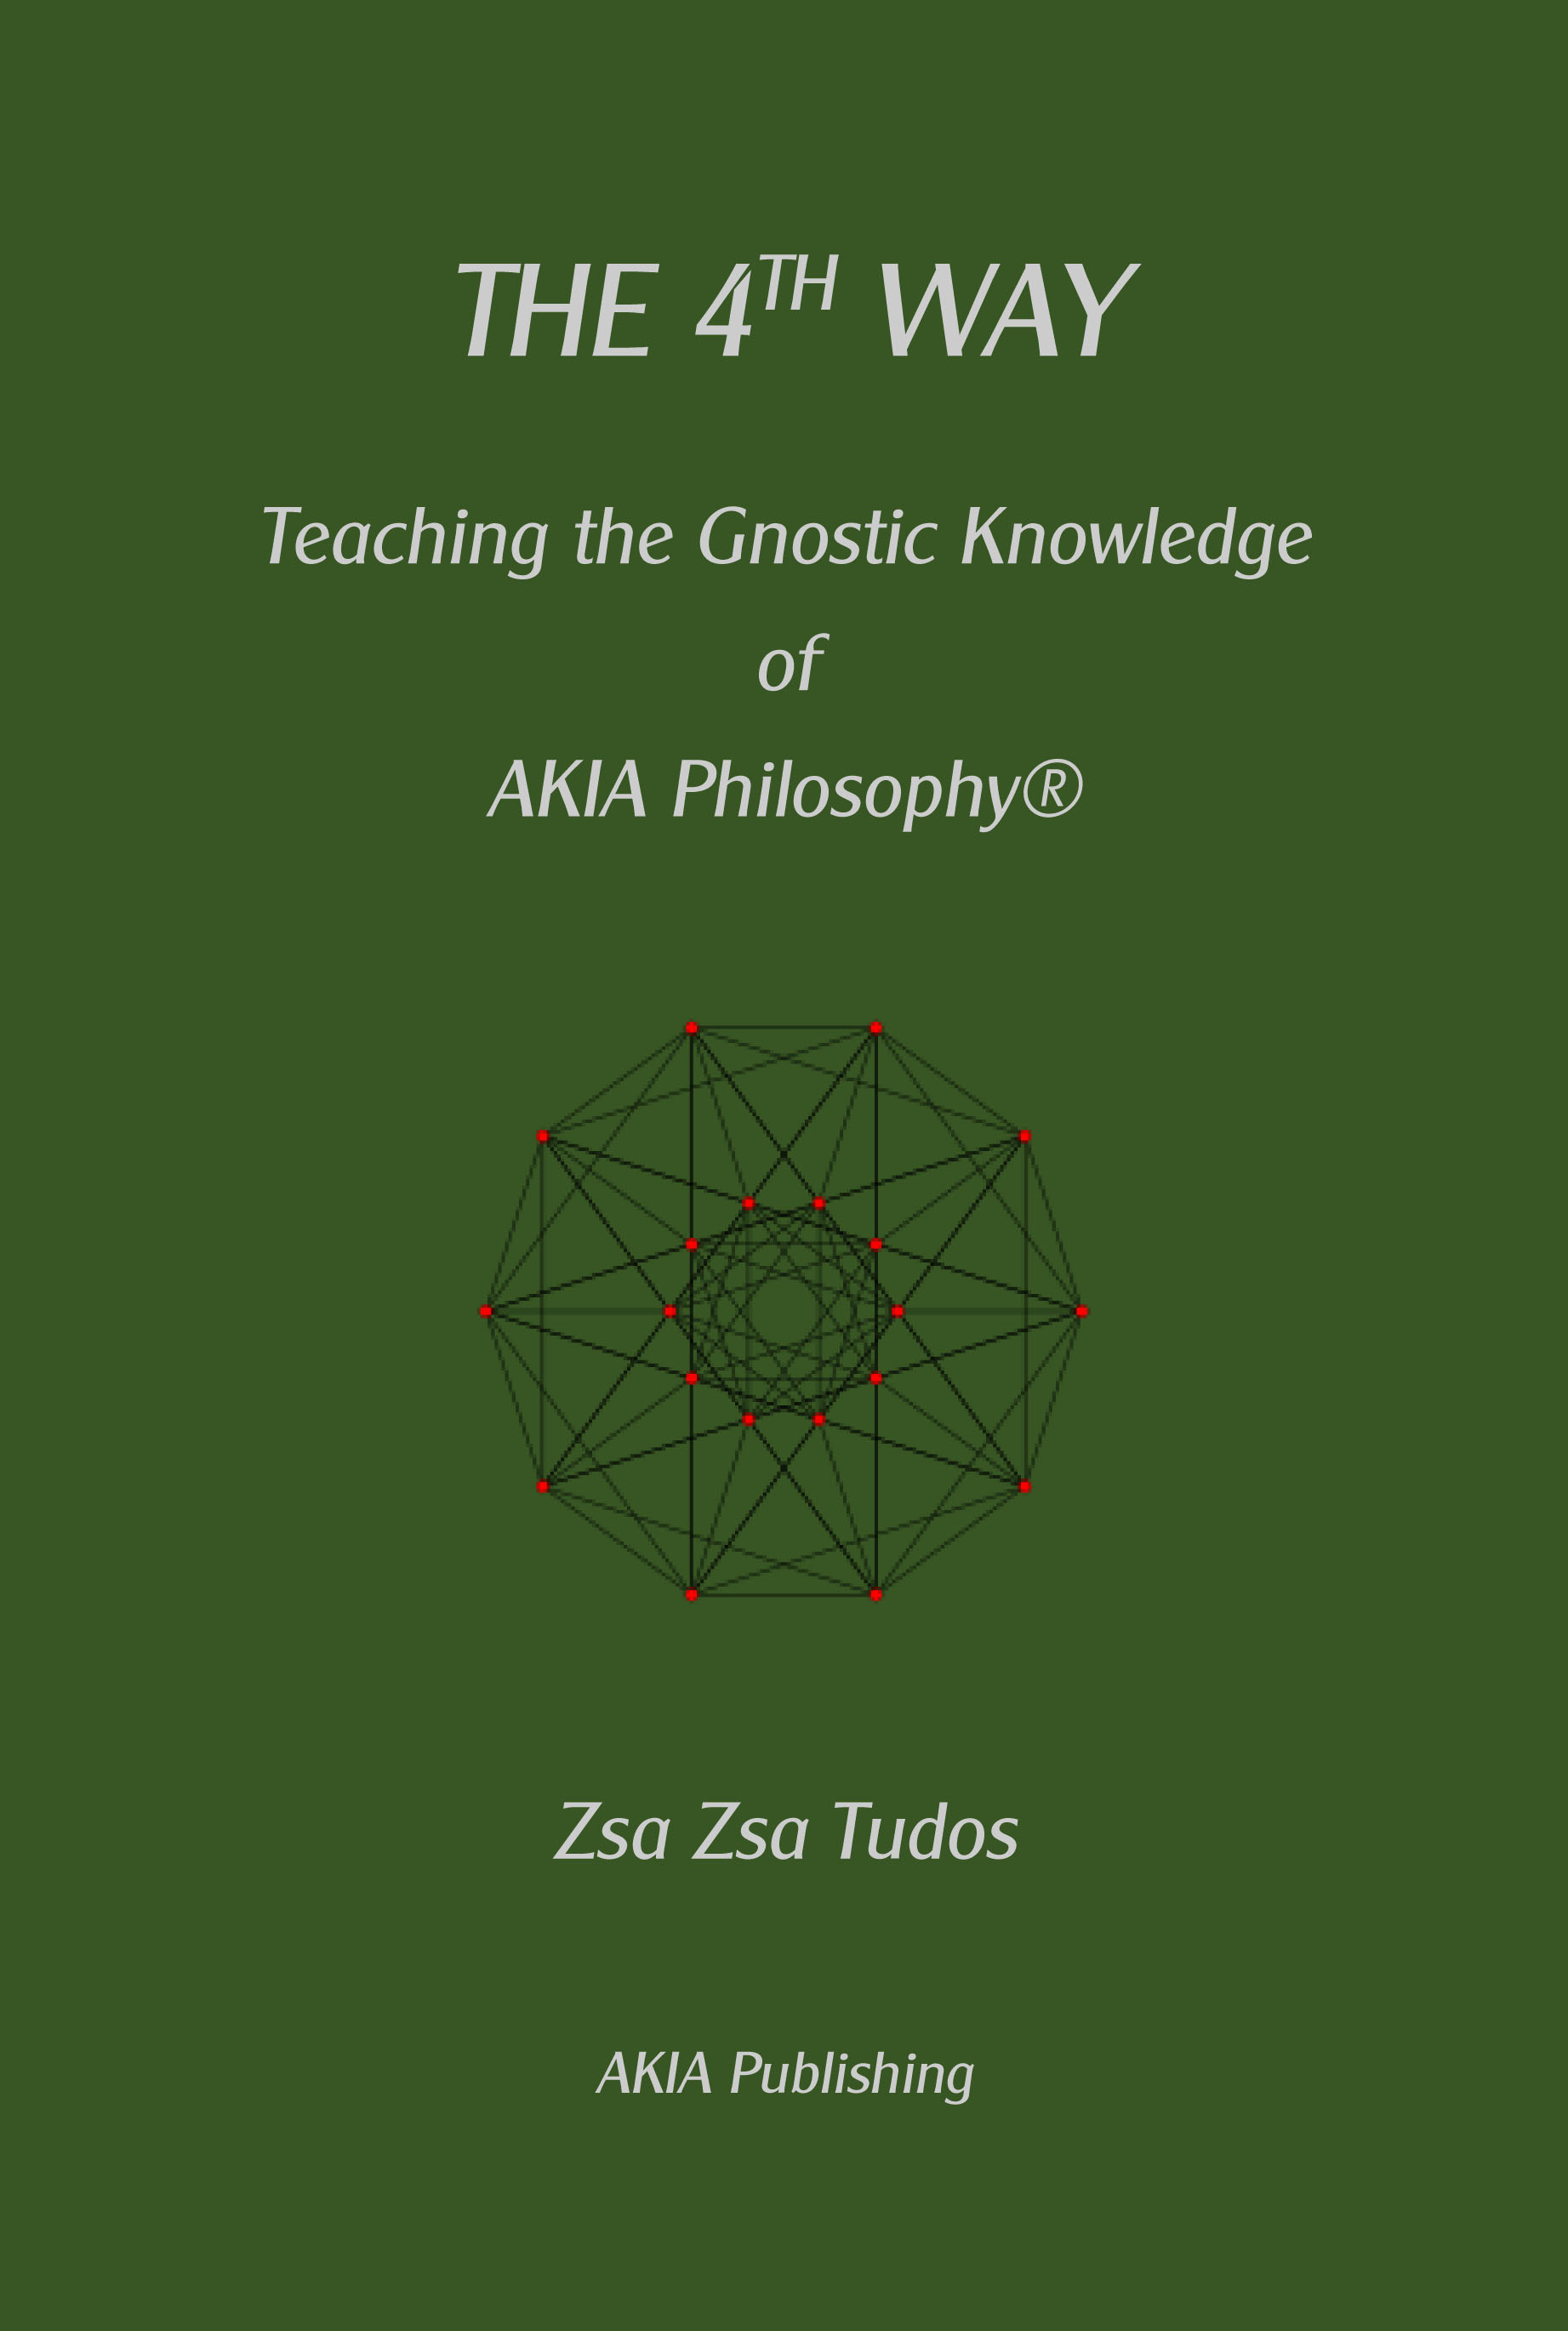 FREE: The 4th Way: Teaching the Gnostic Wisdom of AKIA Philosophy by Zsa Zsa Tudos